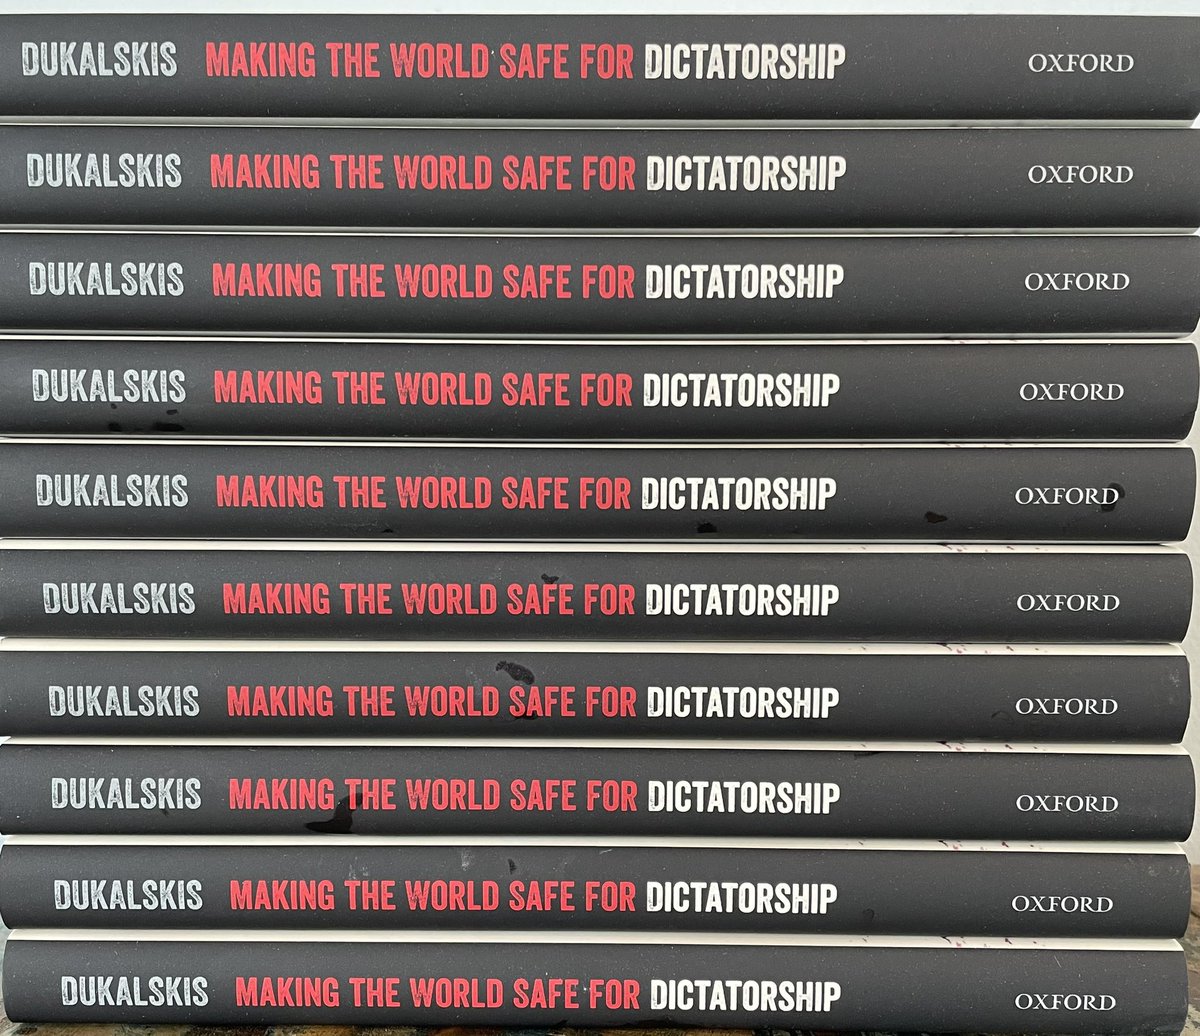 Received author copies of my new  @OUPAcademic book Making the World Safe for Dictatorship If you RT this I’ll put you in a random drawing that I’ll do on Sunday evening. I’ll draw two names and each gets a free copy shipped to them wherever they happen to be on the planet.